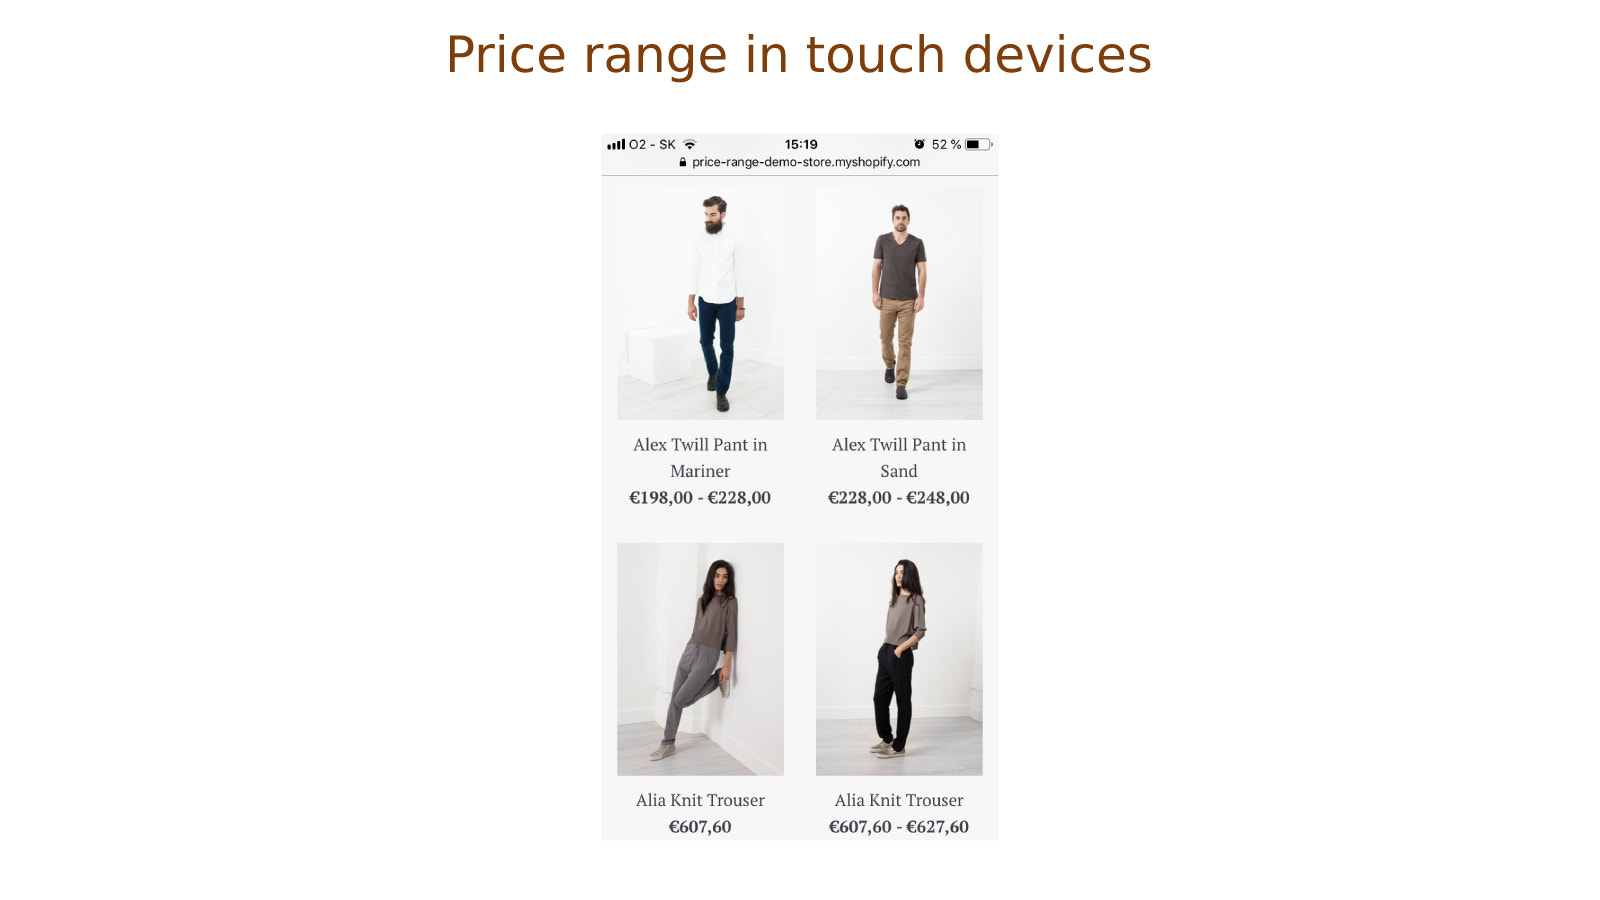 Price ranges for products in touch devices